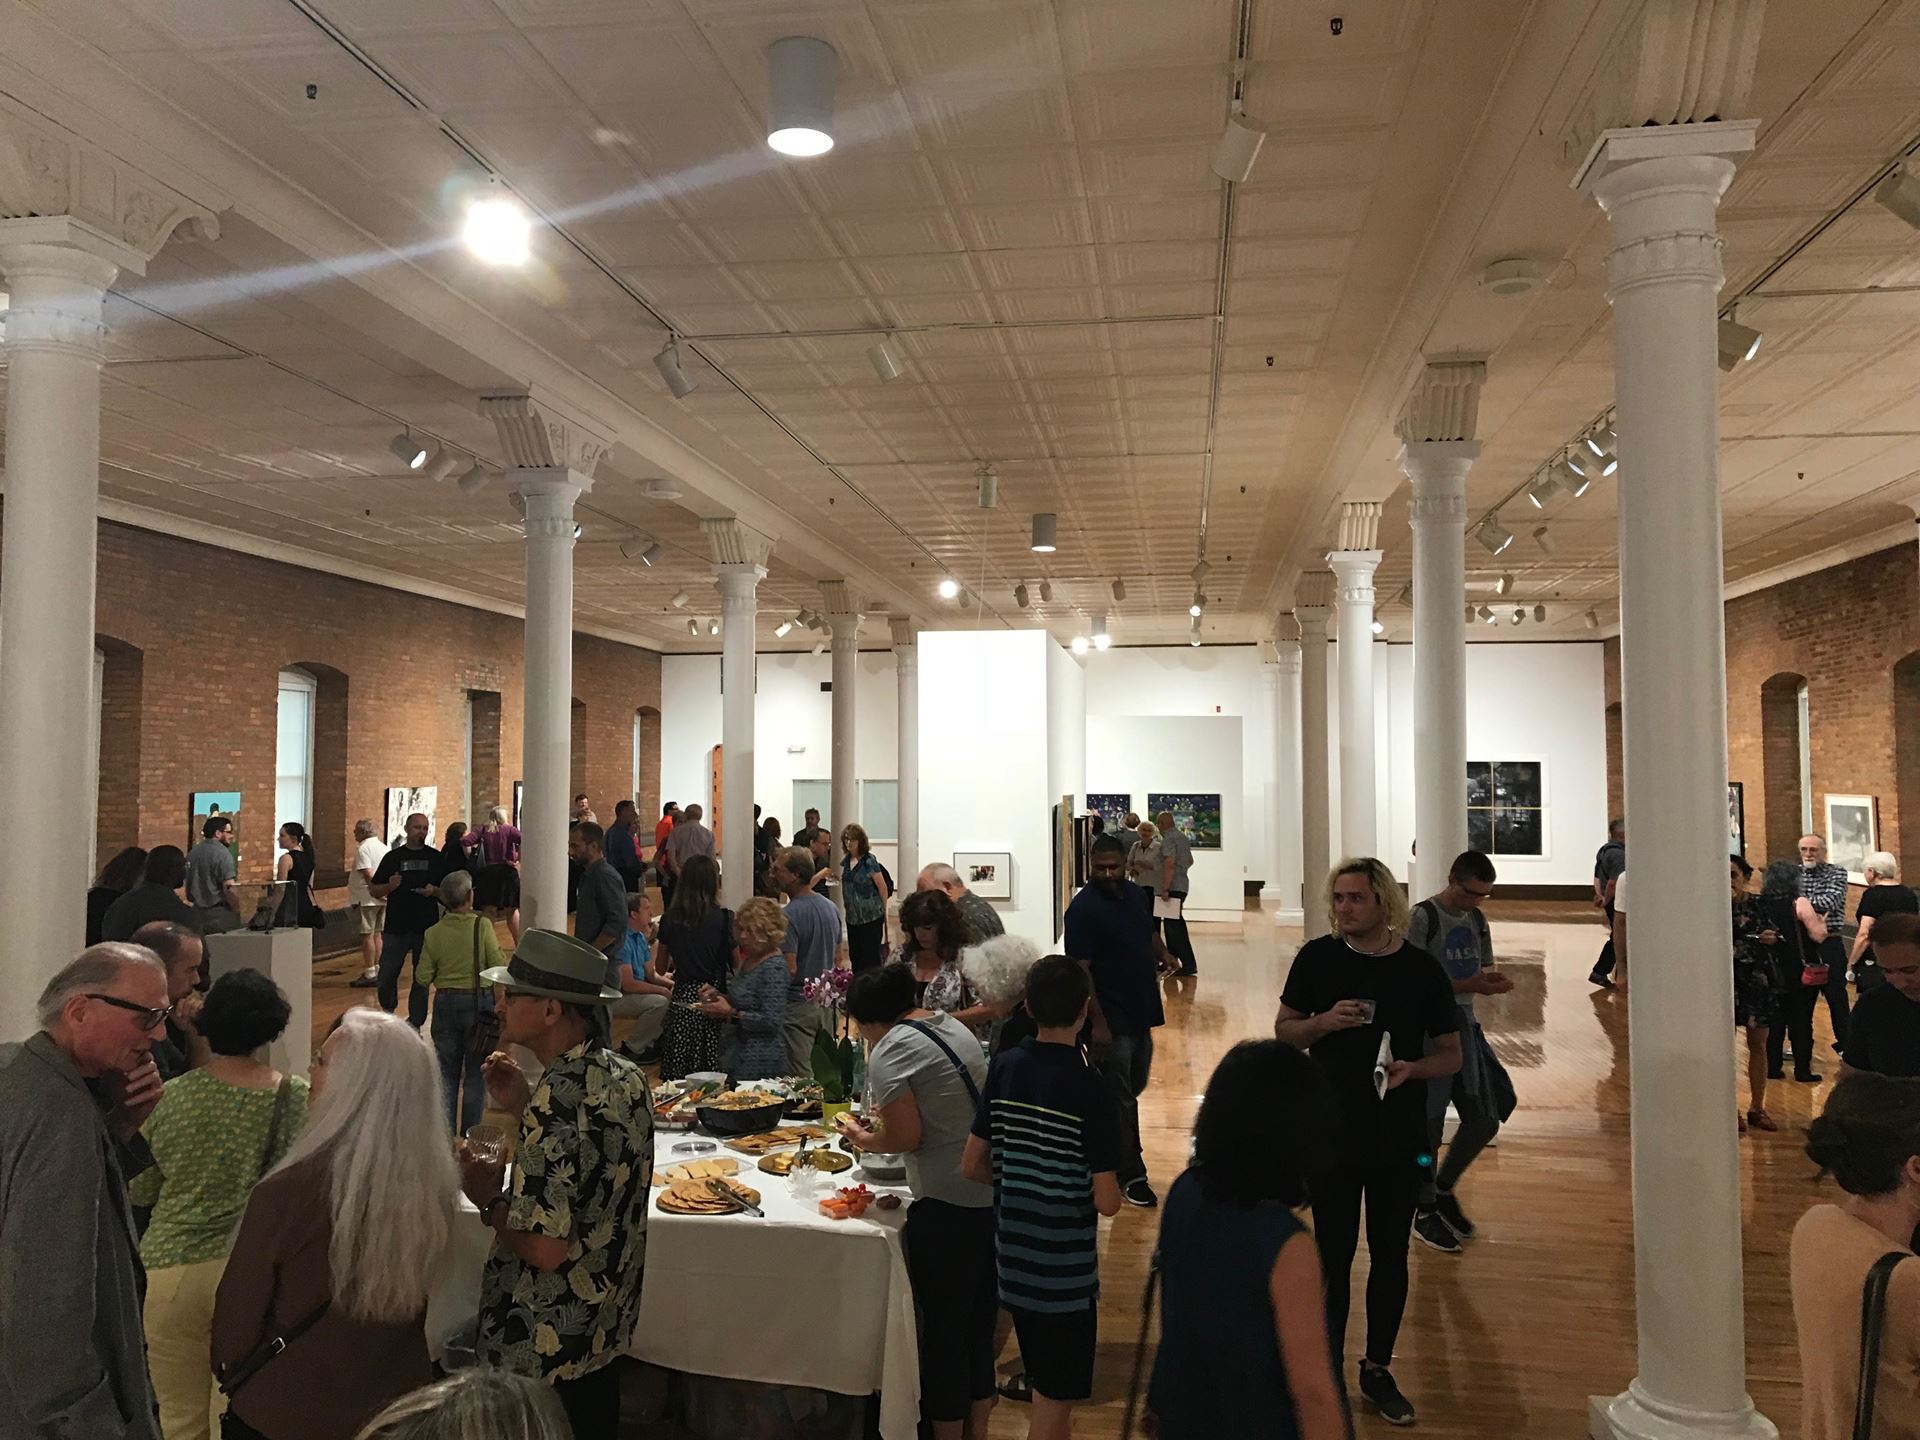 Art opening at Fort Hayes Shot Tower Gallery. A group of people are talking in little groups while others look at art and fill their plates with food.